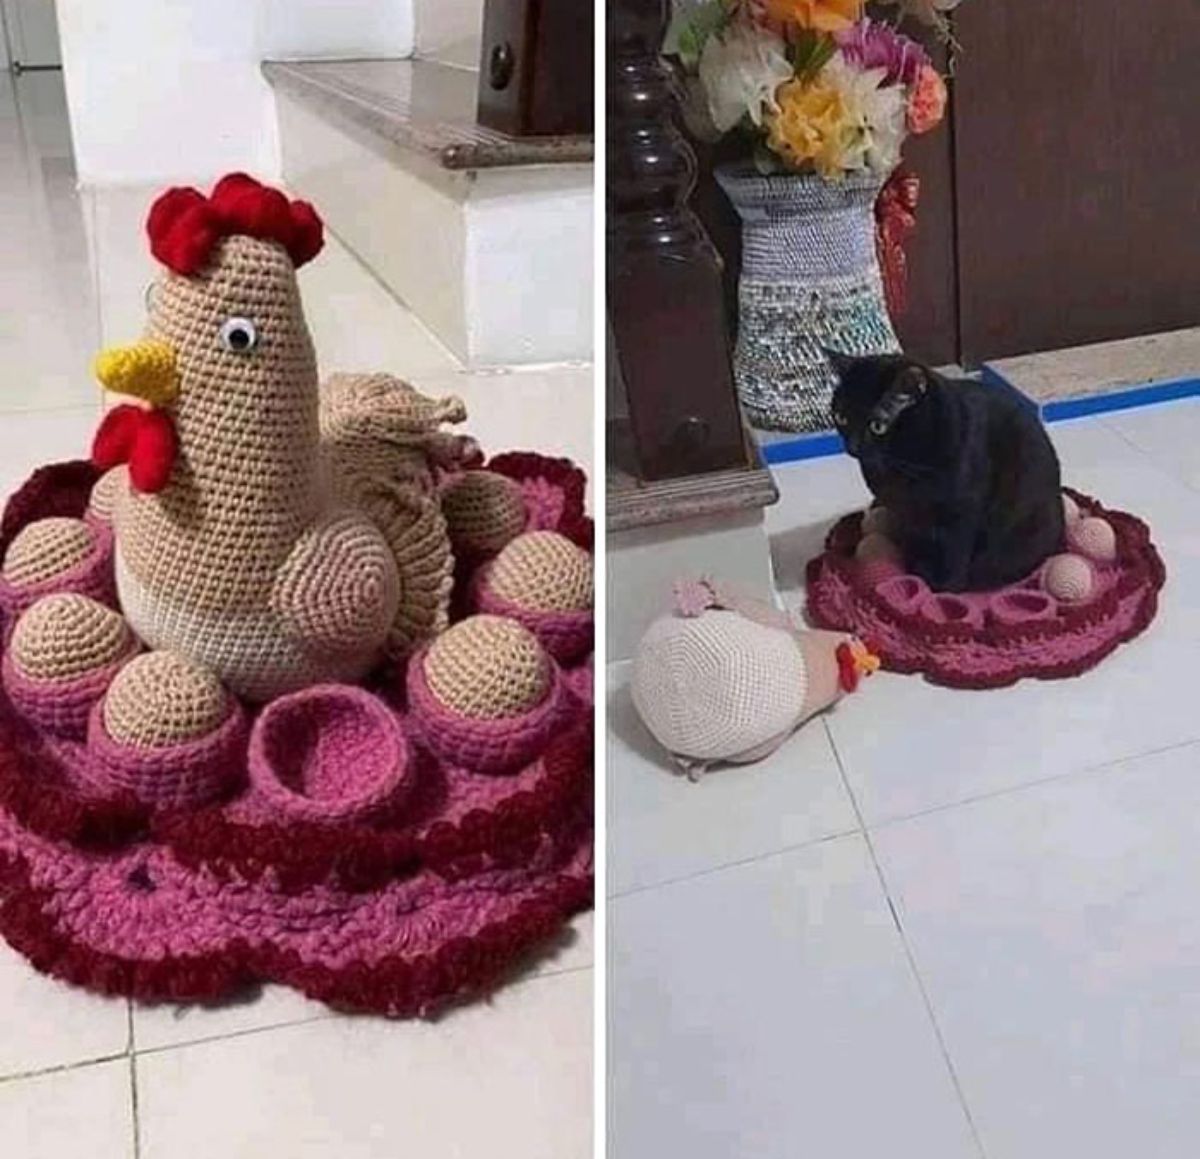 2 photos of a knitted hen sitting among eggs being pushed aside so a cat can perch in the middle